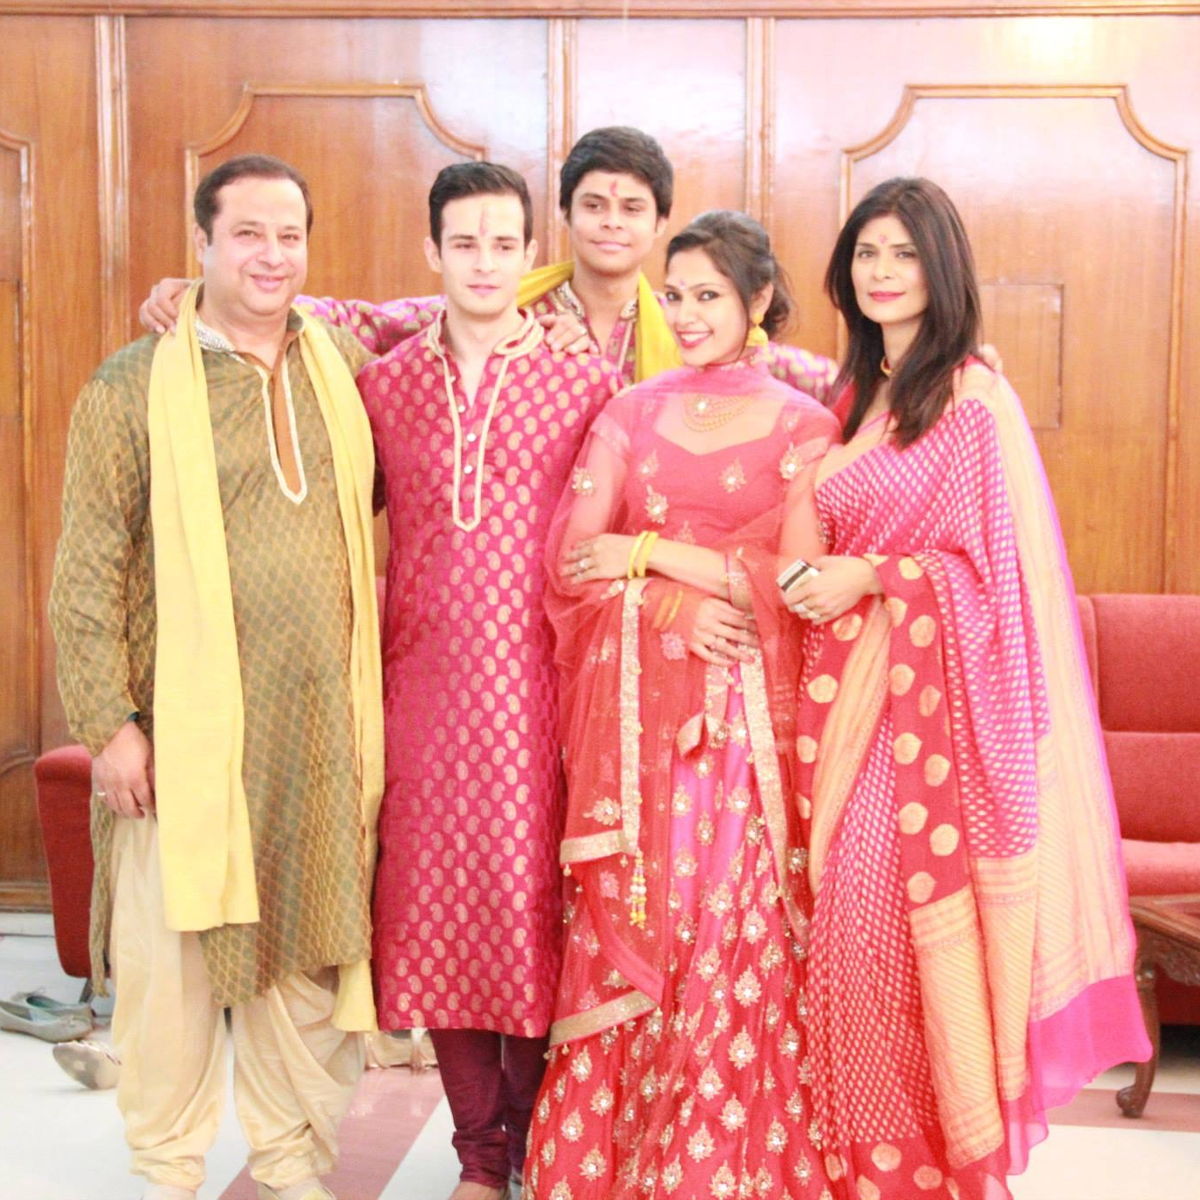 Delicious Delhi dinner and dressing up like royals